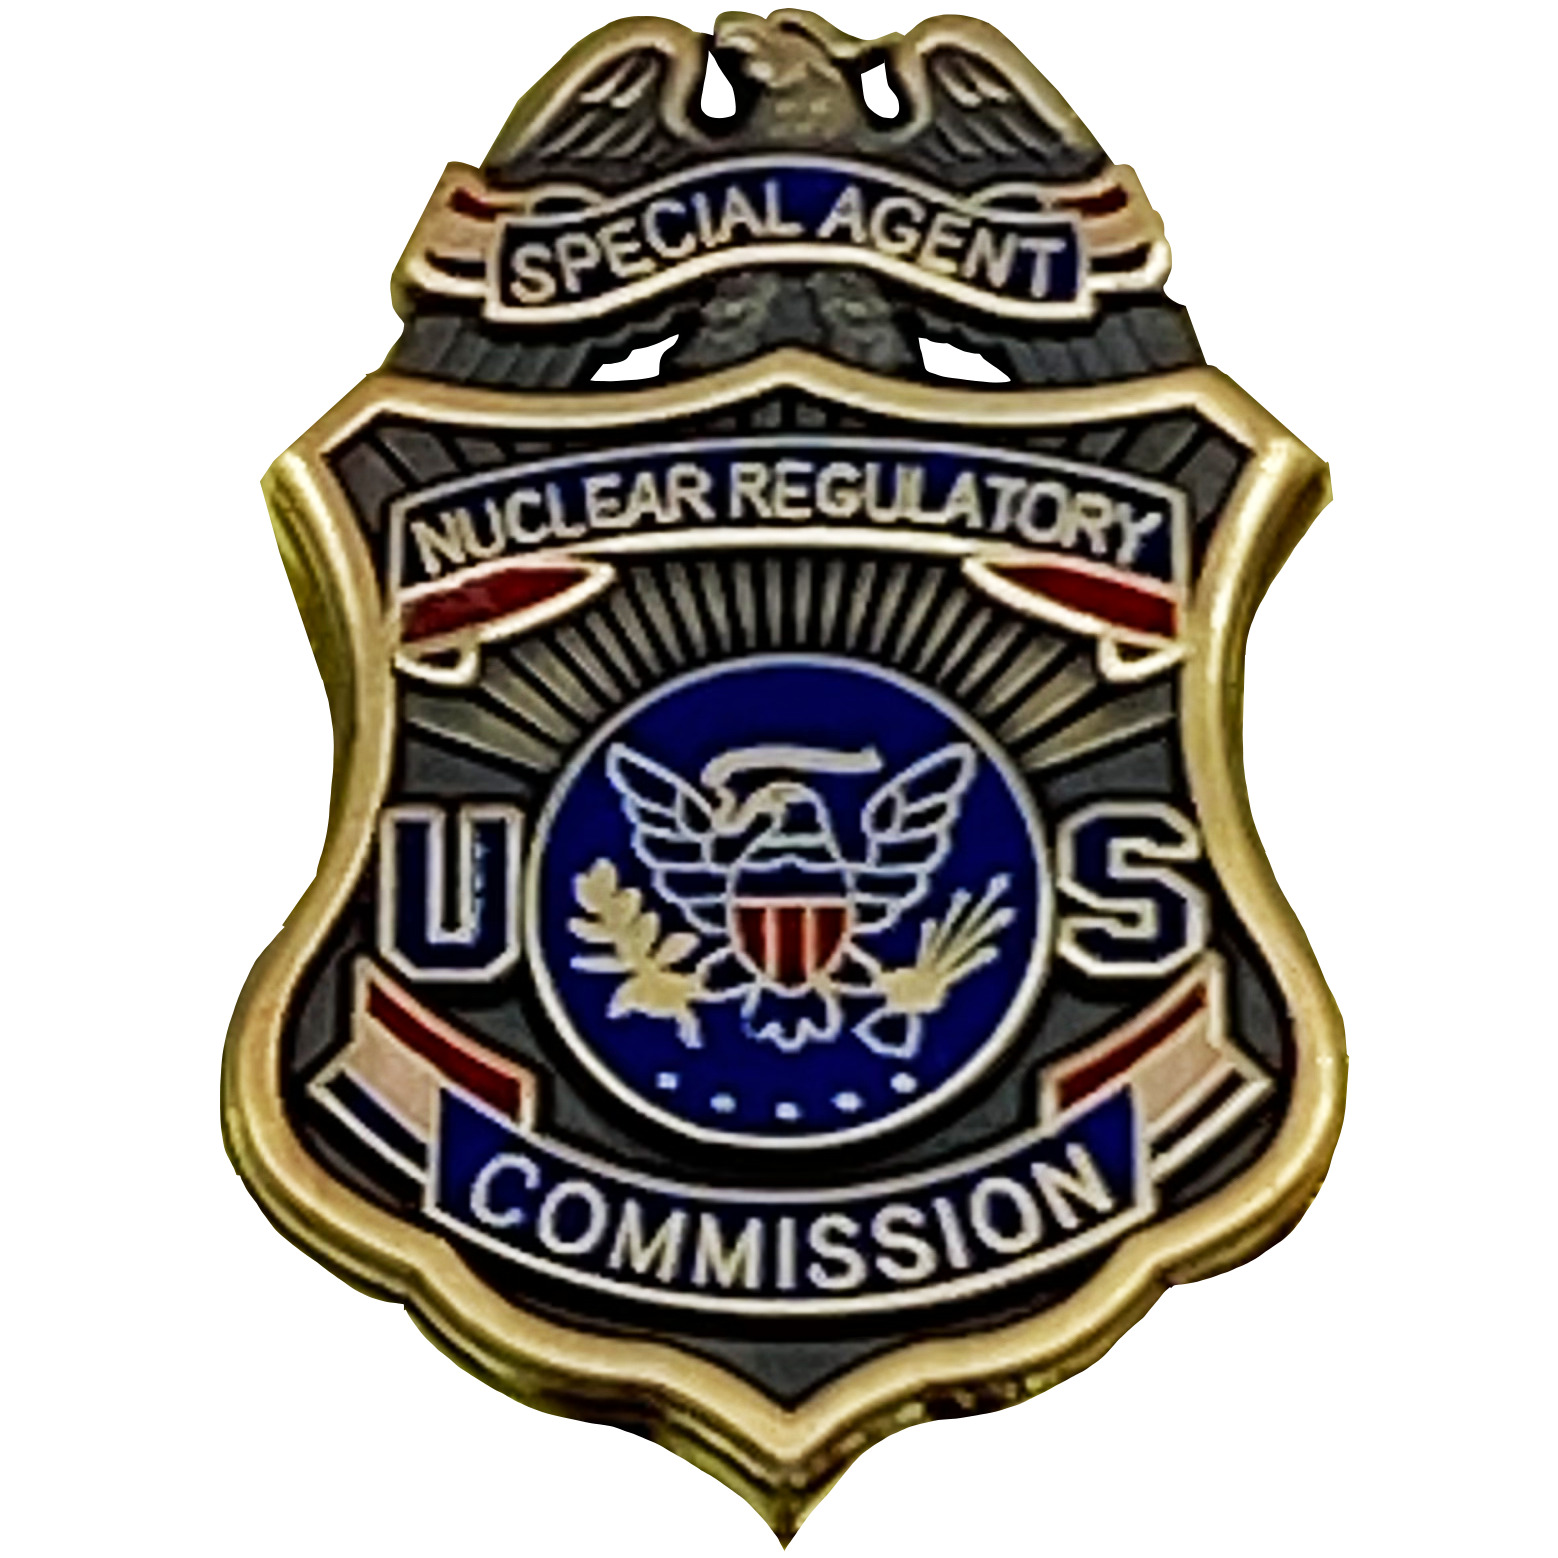 CL13-10 Nuclear Commission Regulatory Commission Special Agent metal pin